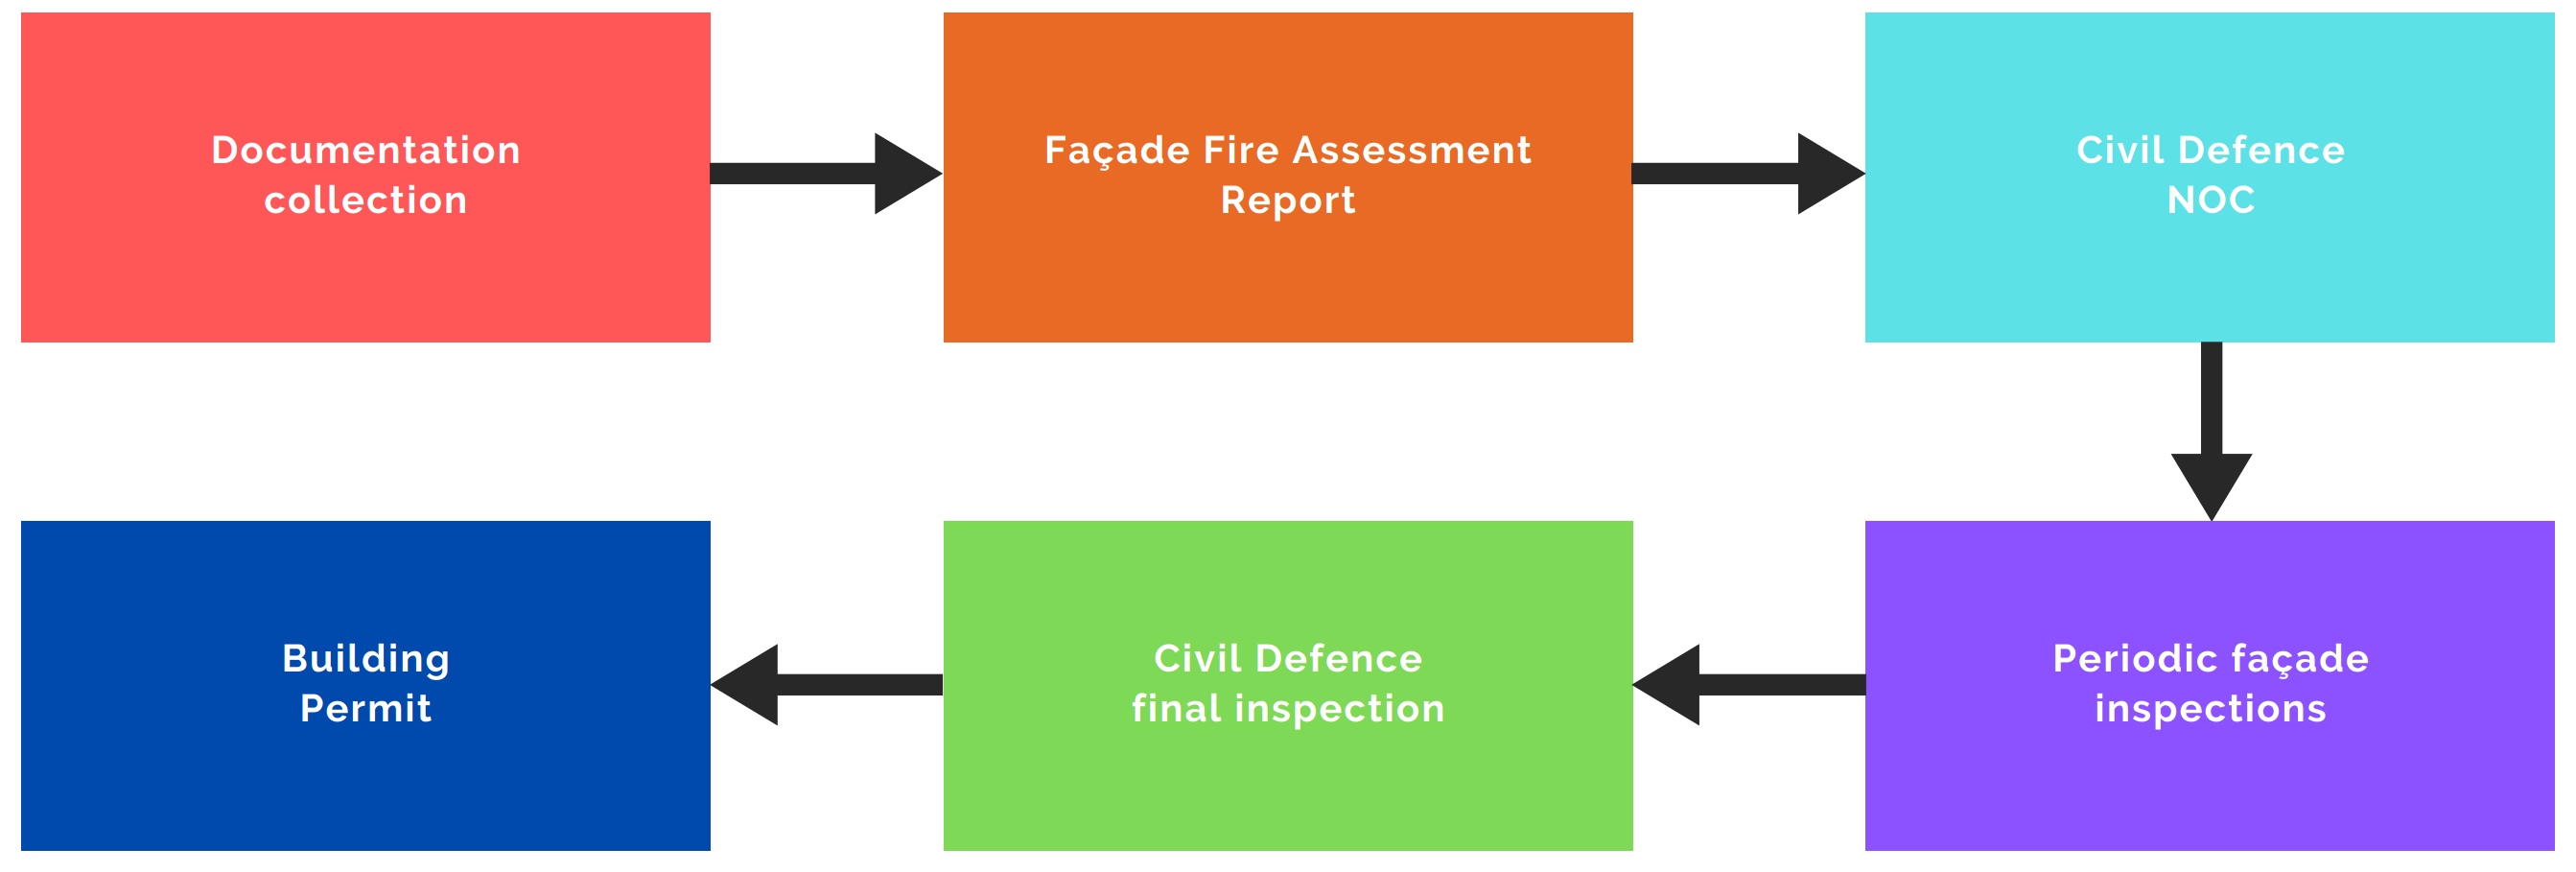 Summary of façade fire assessment and inspection process in the UAE